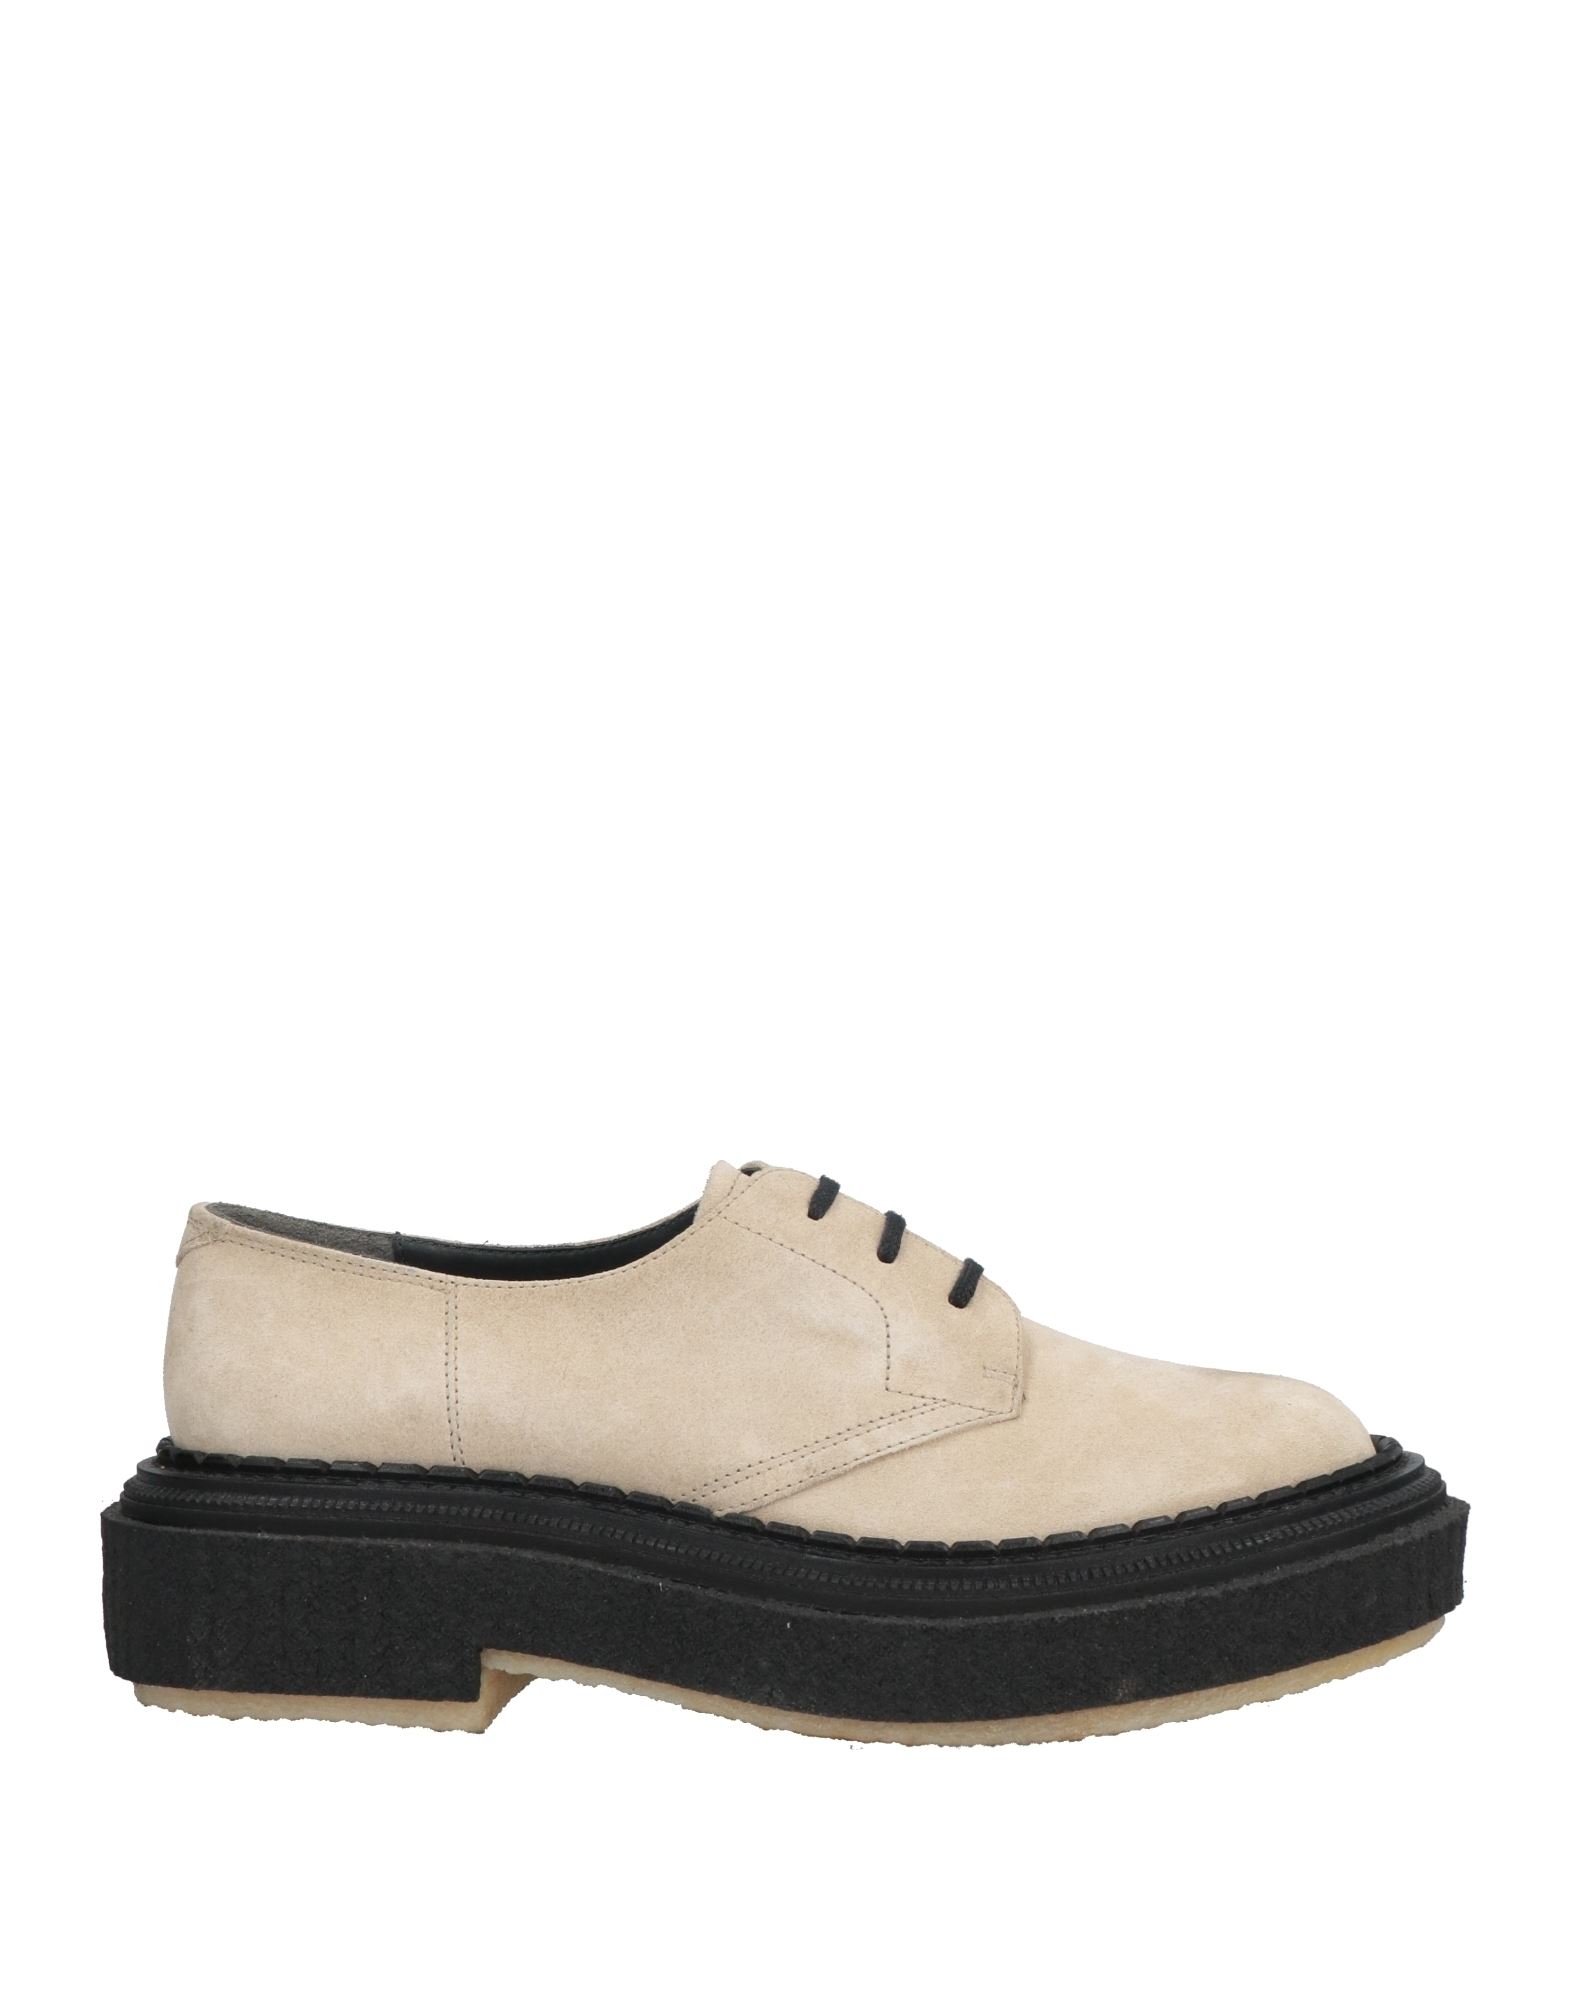 Adieu Lace-up Shoes In Light Grey